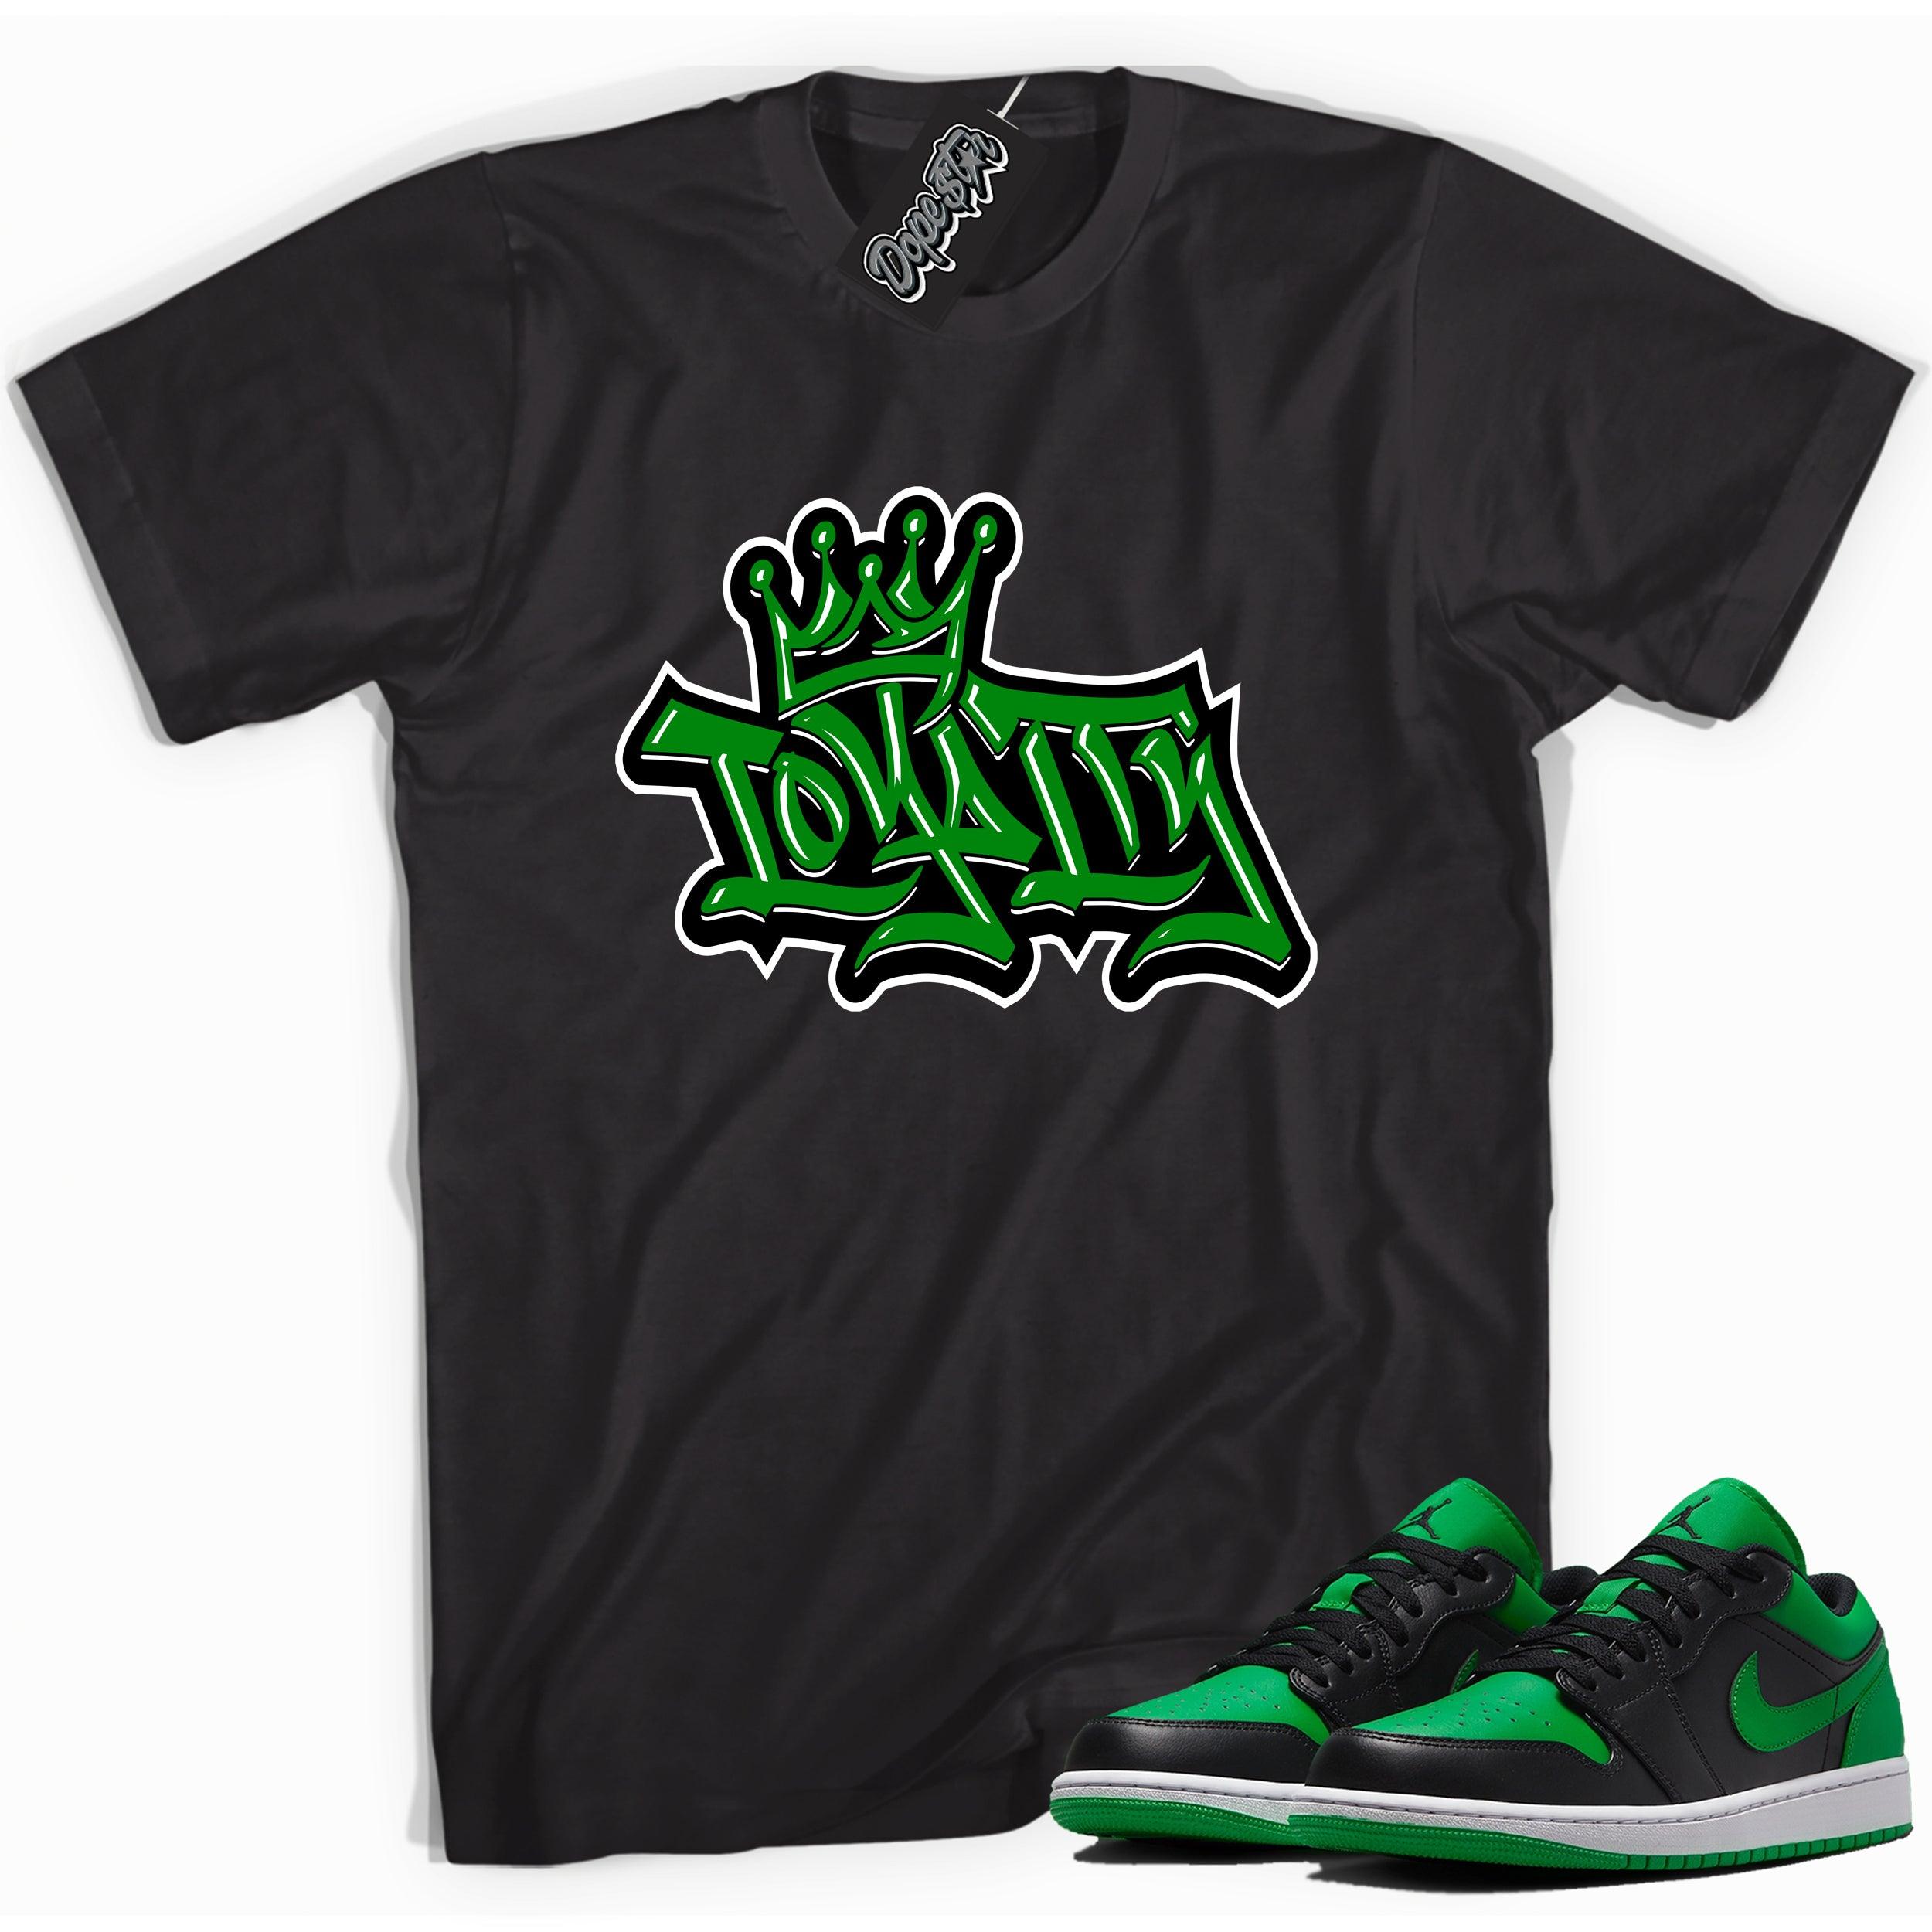 Cool black graphic tee with 'loyalty' print, that perfectly matches Air Jordan 1 Low Lucky Green sneakers